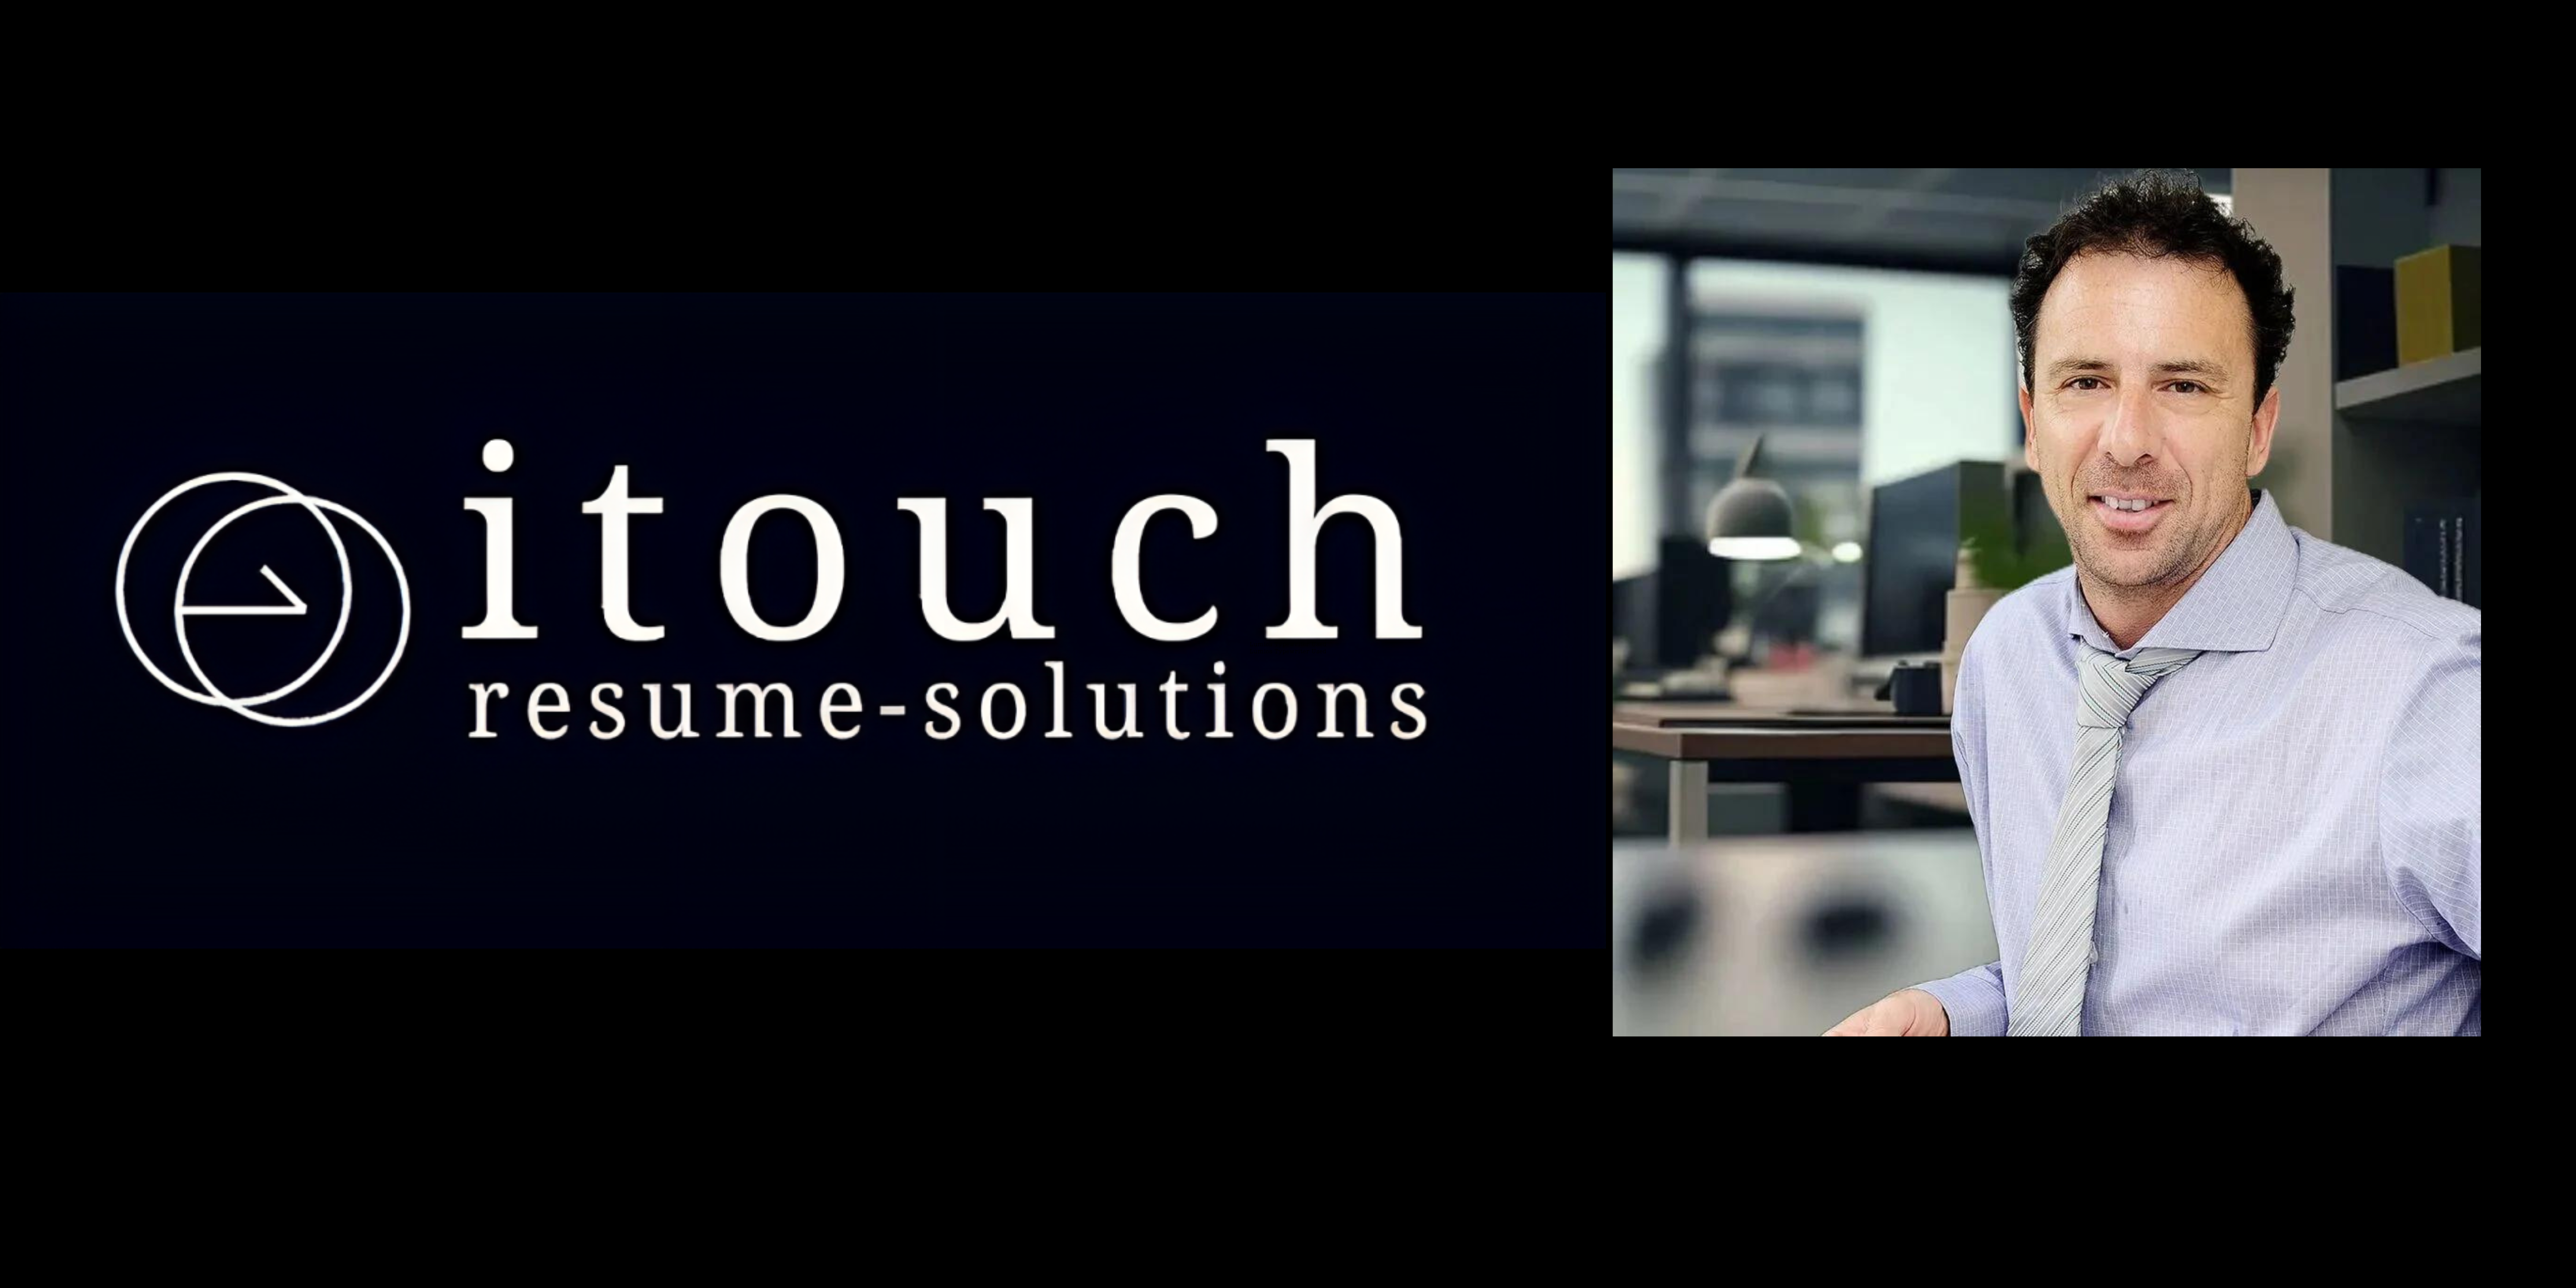 Best resume writers in Sydney - itouch resume-solutions